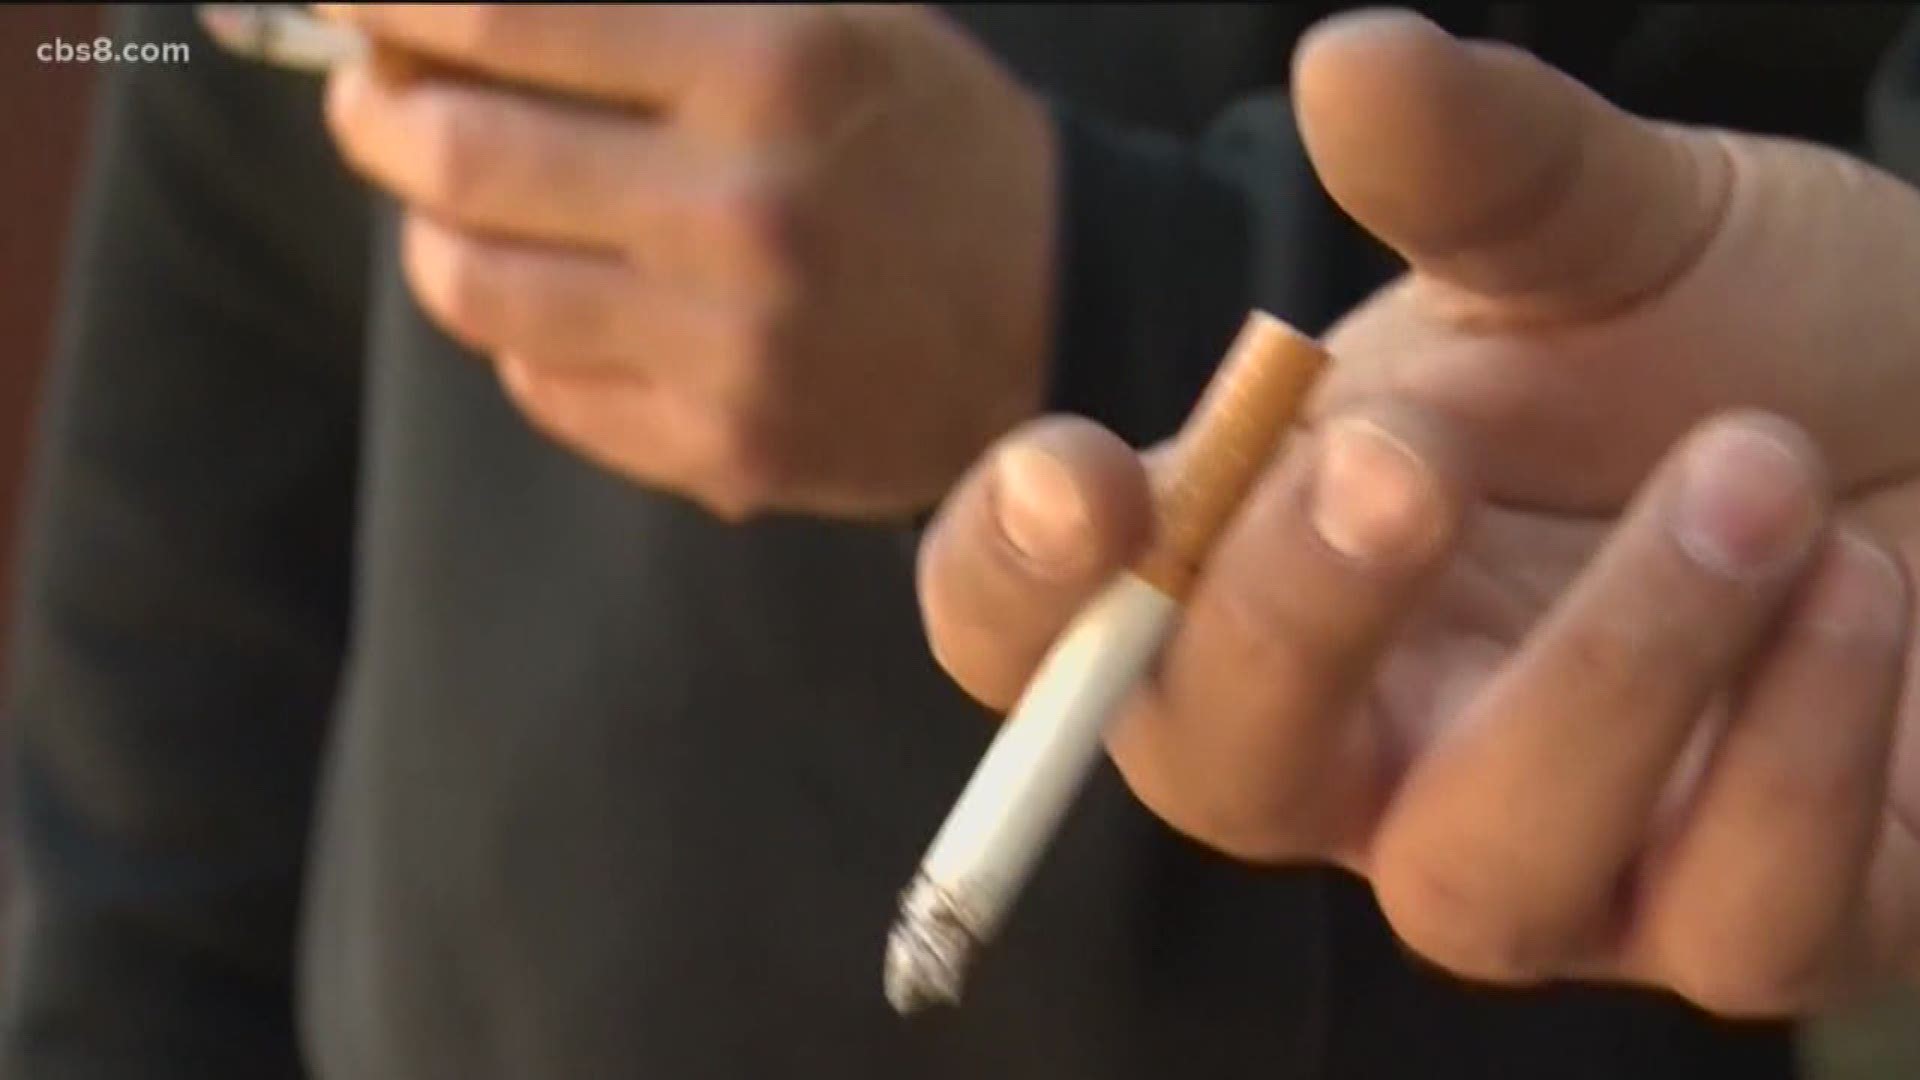 The City of La Mesa on Tuesday became the latest in a string of California cities officially saying “no” to smoking.